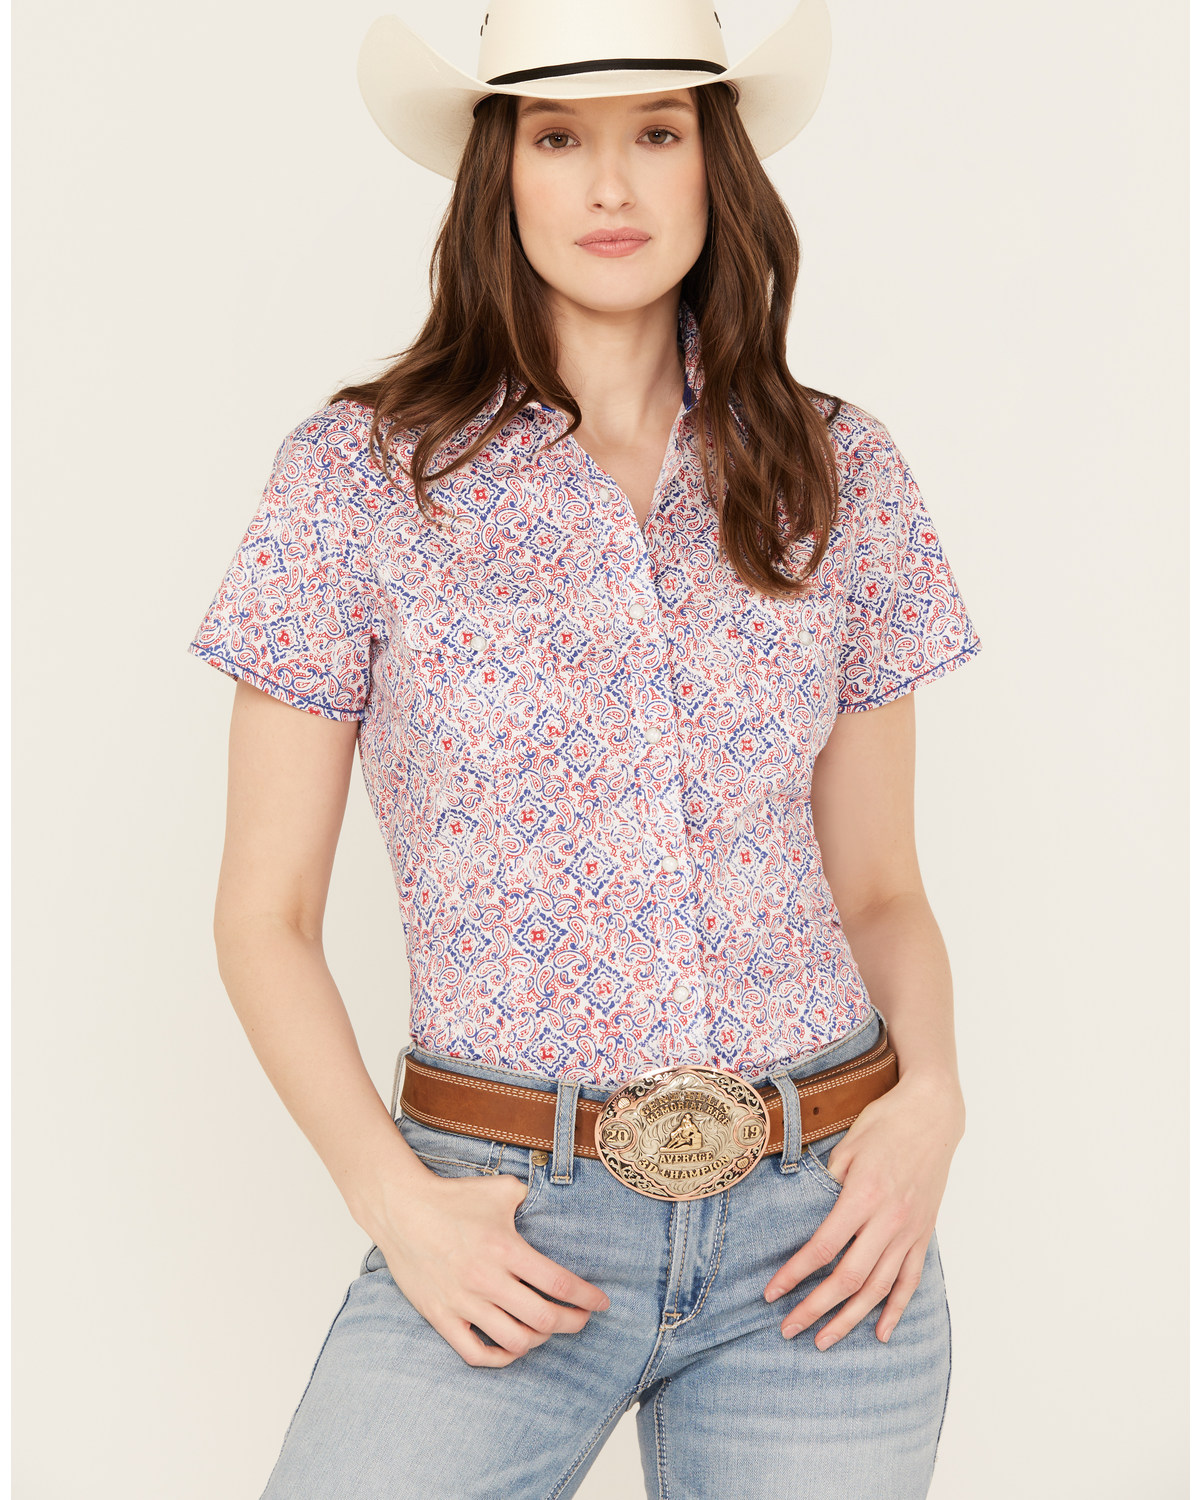 Rough Stock by Panhandle Women's Paisley Print Stretch Short Sleeve Western Pearl Snap Shirt